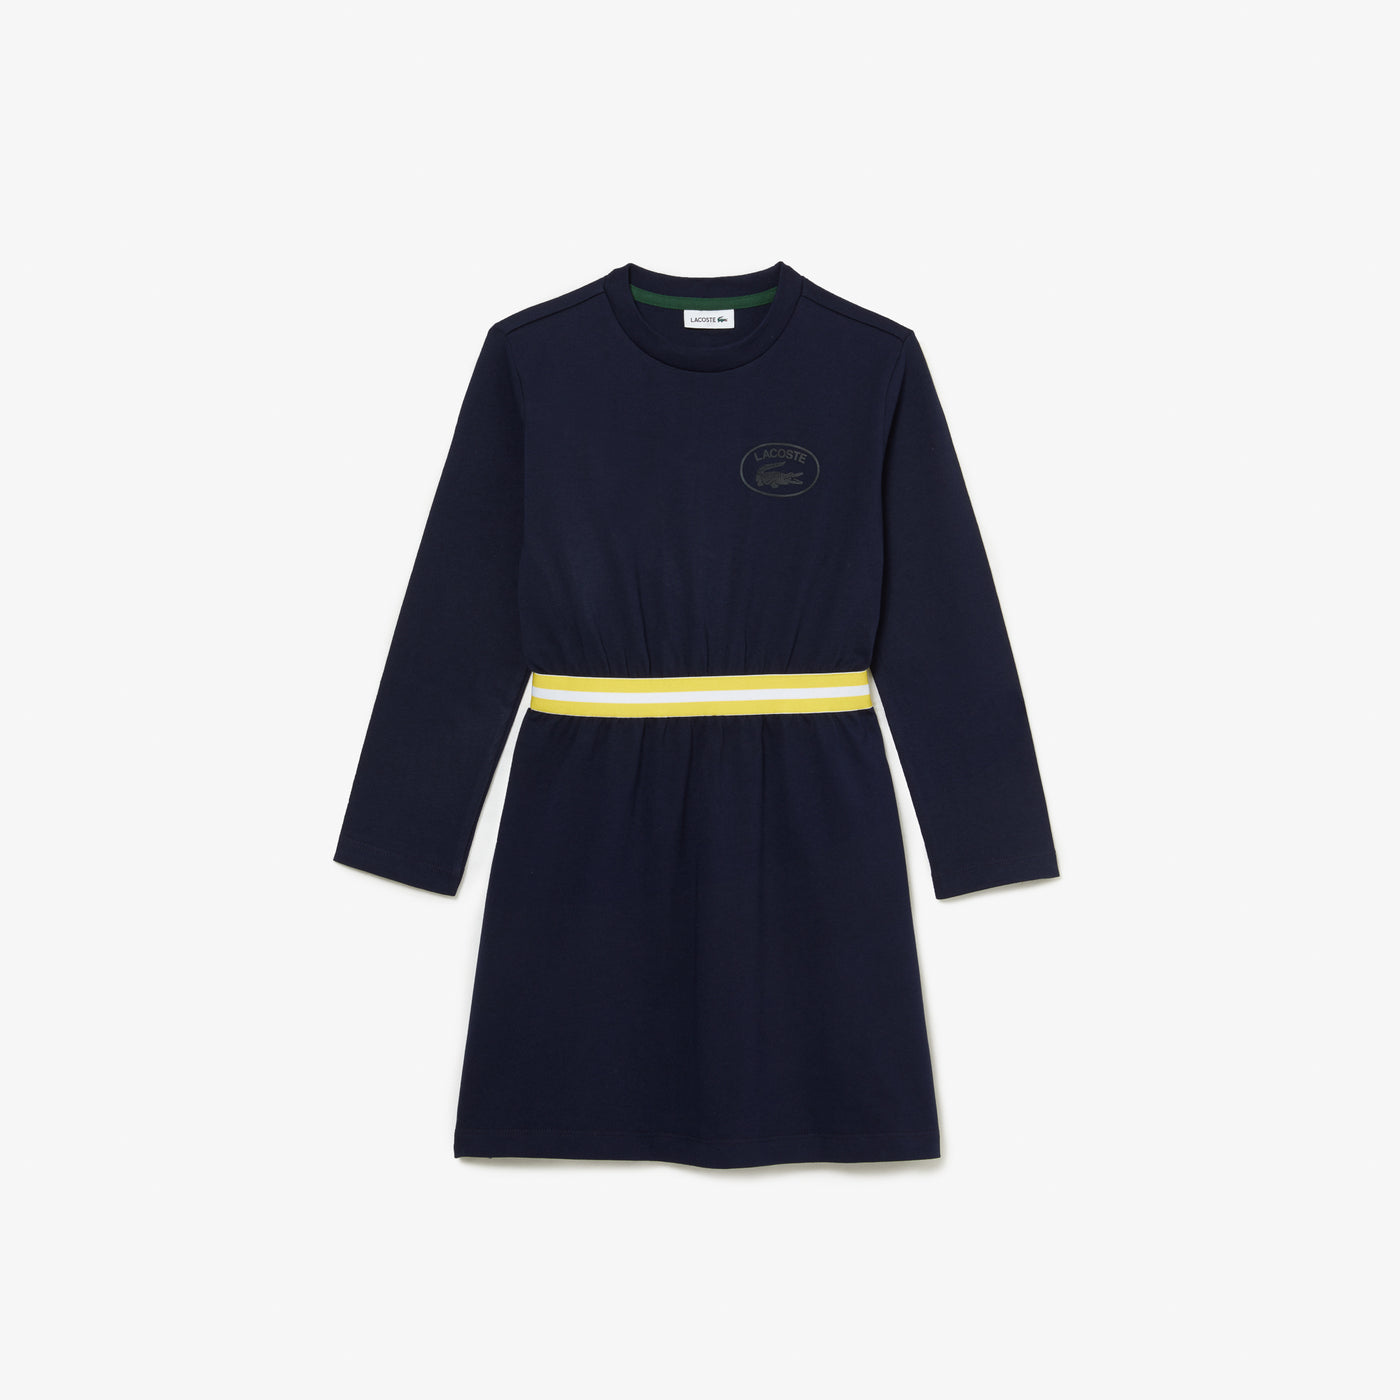 Shop The Latest Collection Of Lacoste Girls' Lacoste Contrast Waist Cotton Jersey Dress - Ej9754 In Lebanon